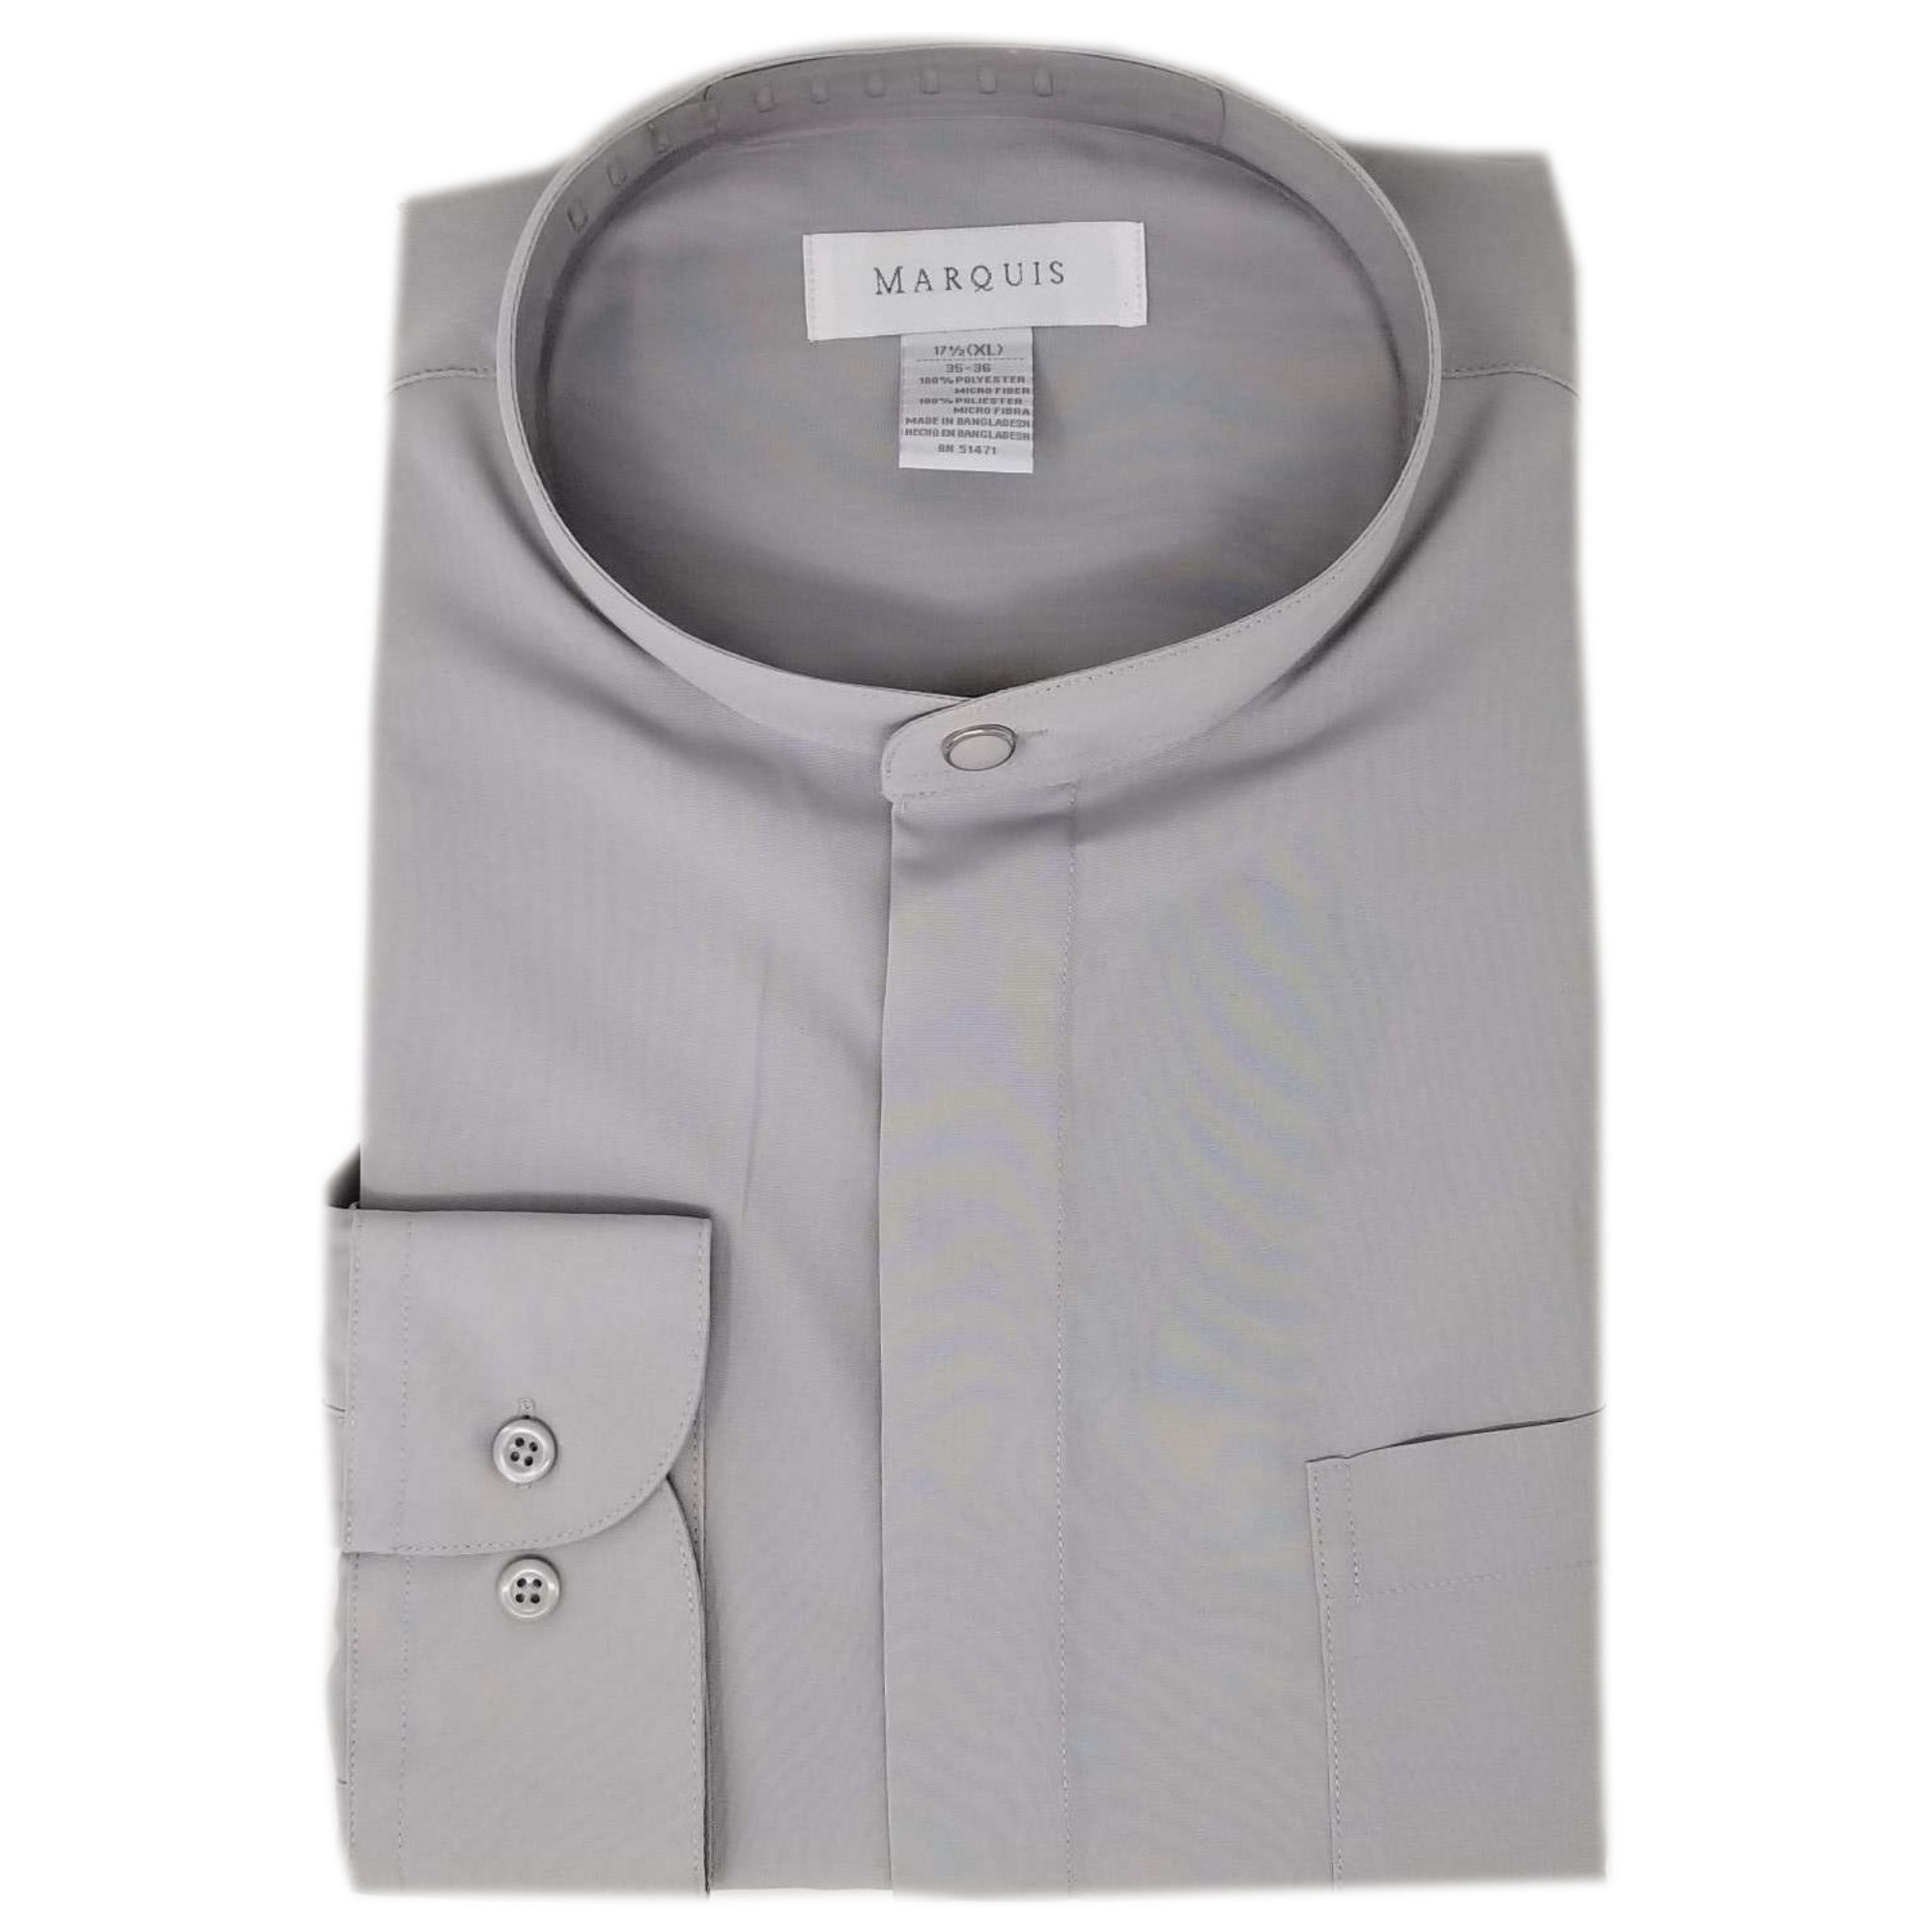 Marquis Long Sleeve Banded Collar Shirt Size  S To XXXL Banded Collar Shirt Marquis Silver Grey Small 14.5, 32-33 